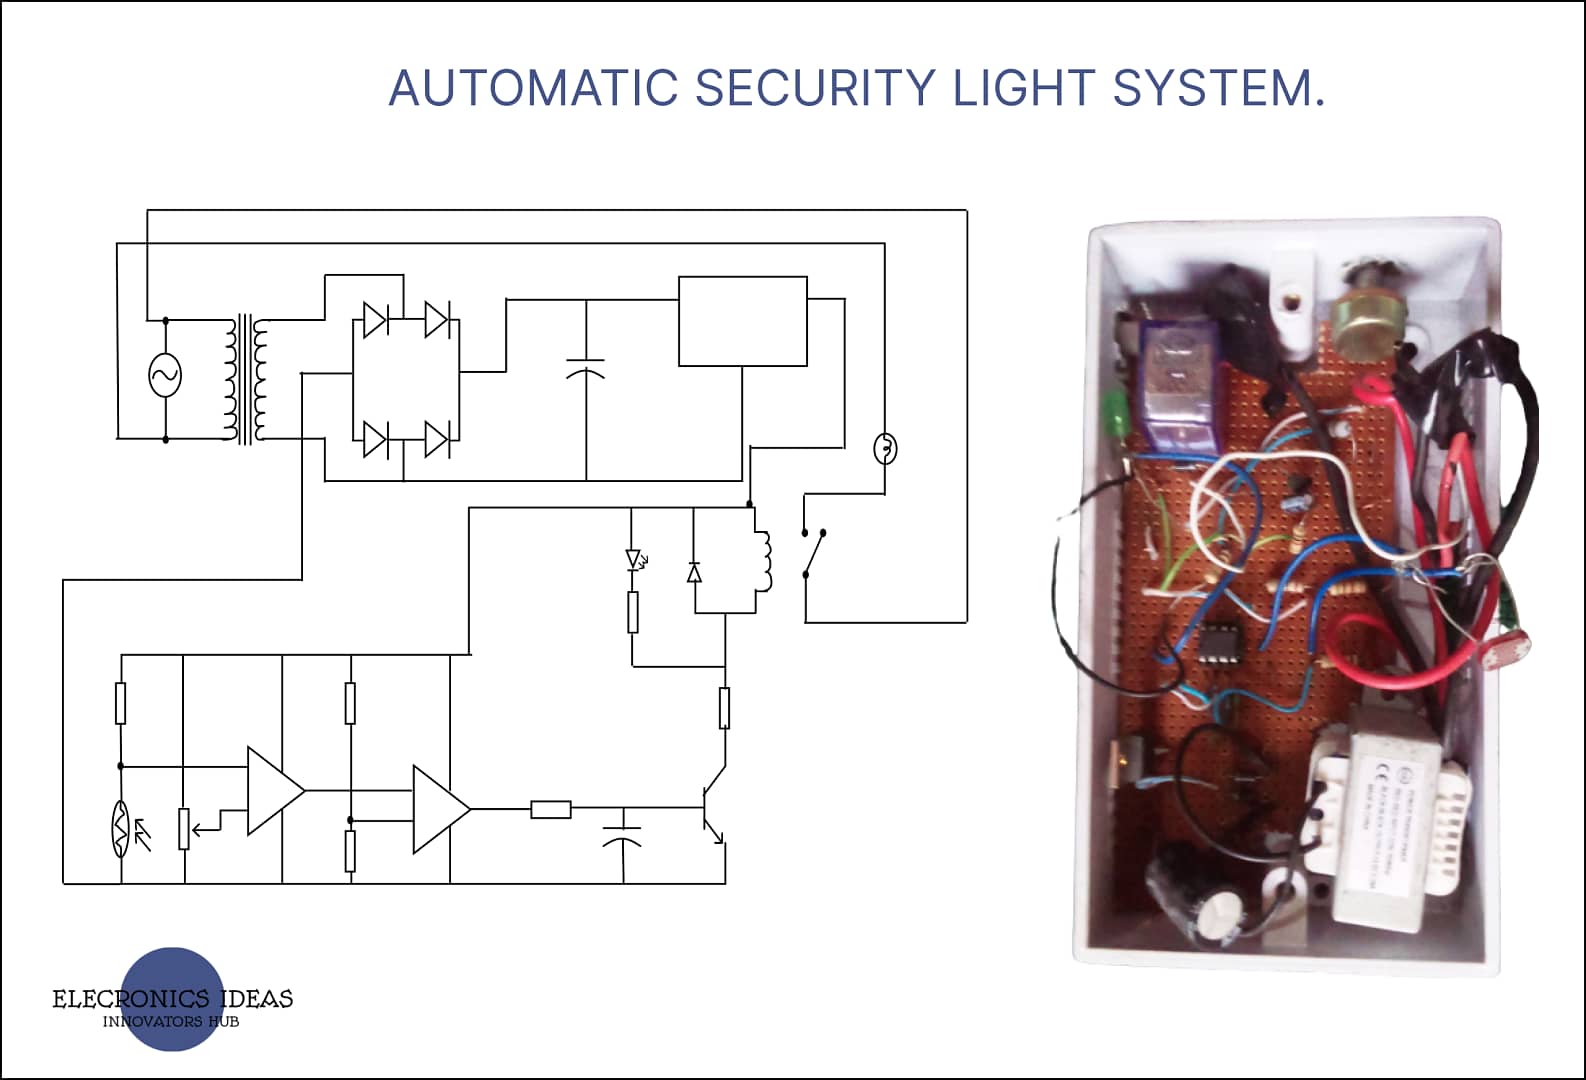 Automatic security light system